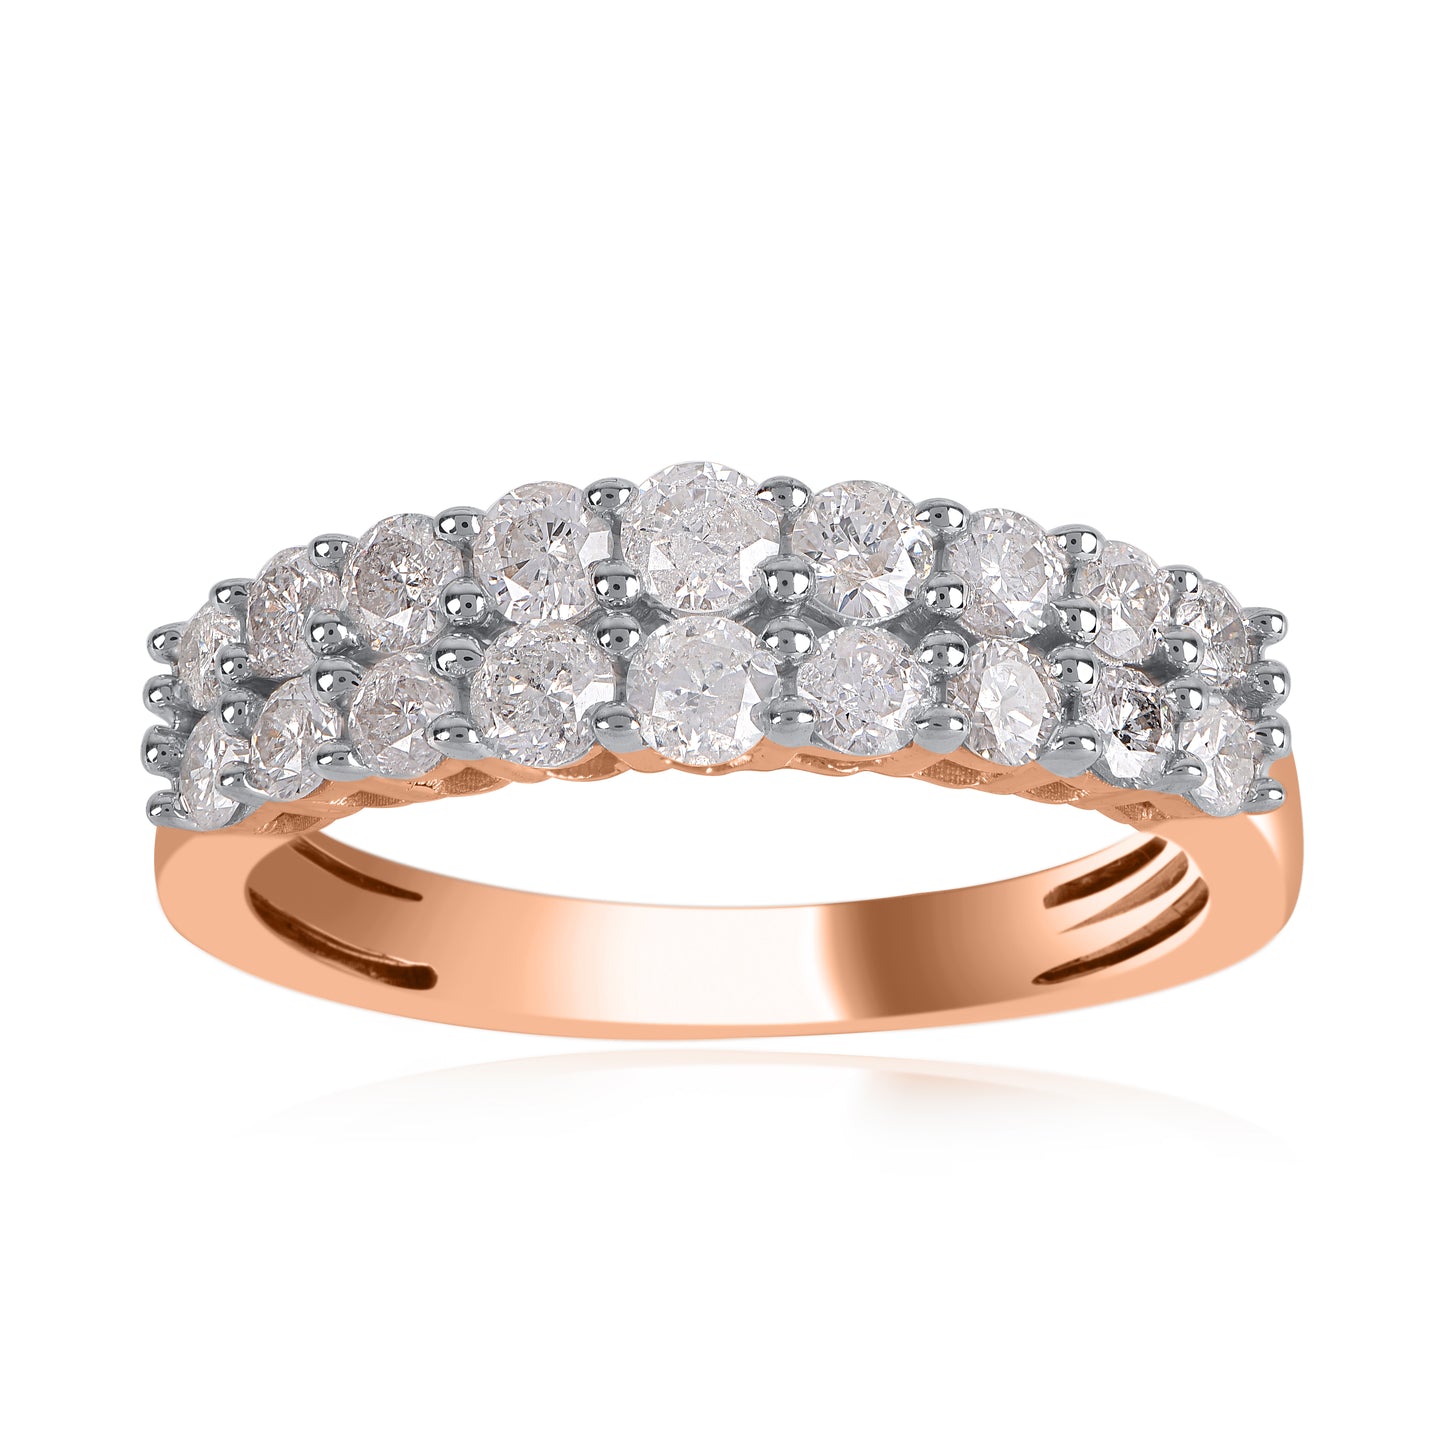 Double Row Wedding Band Ring in 10K Gold